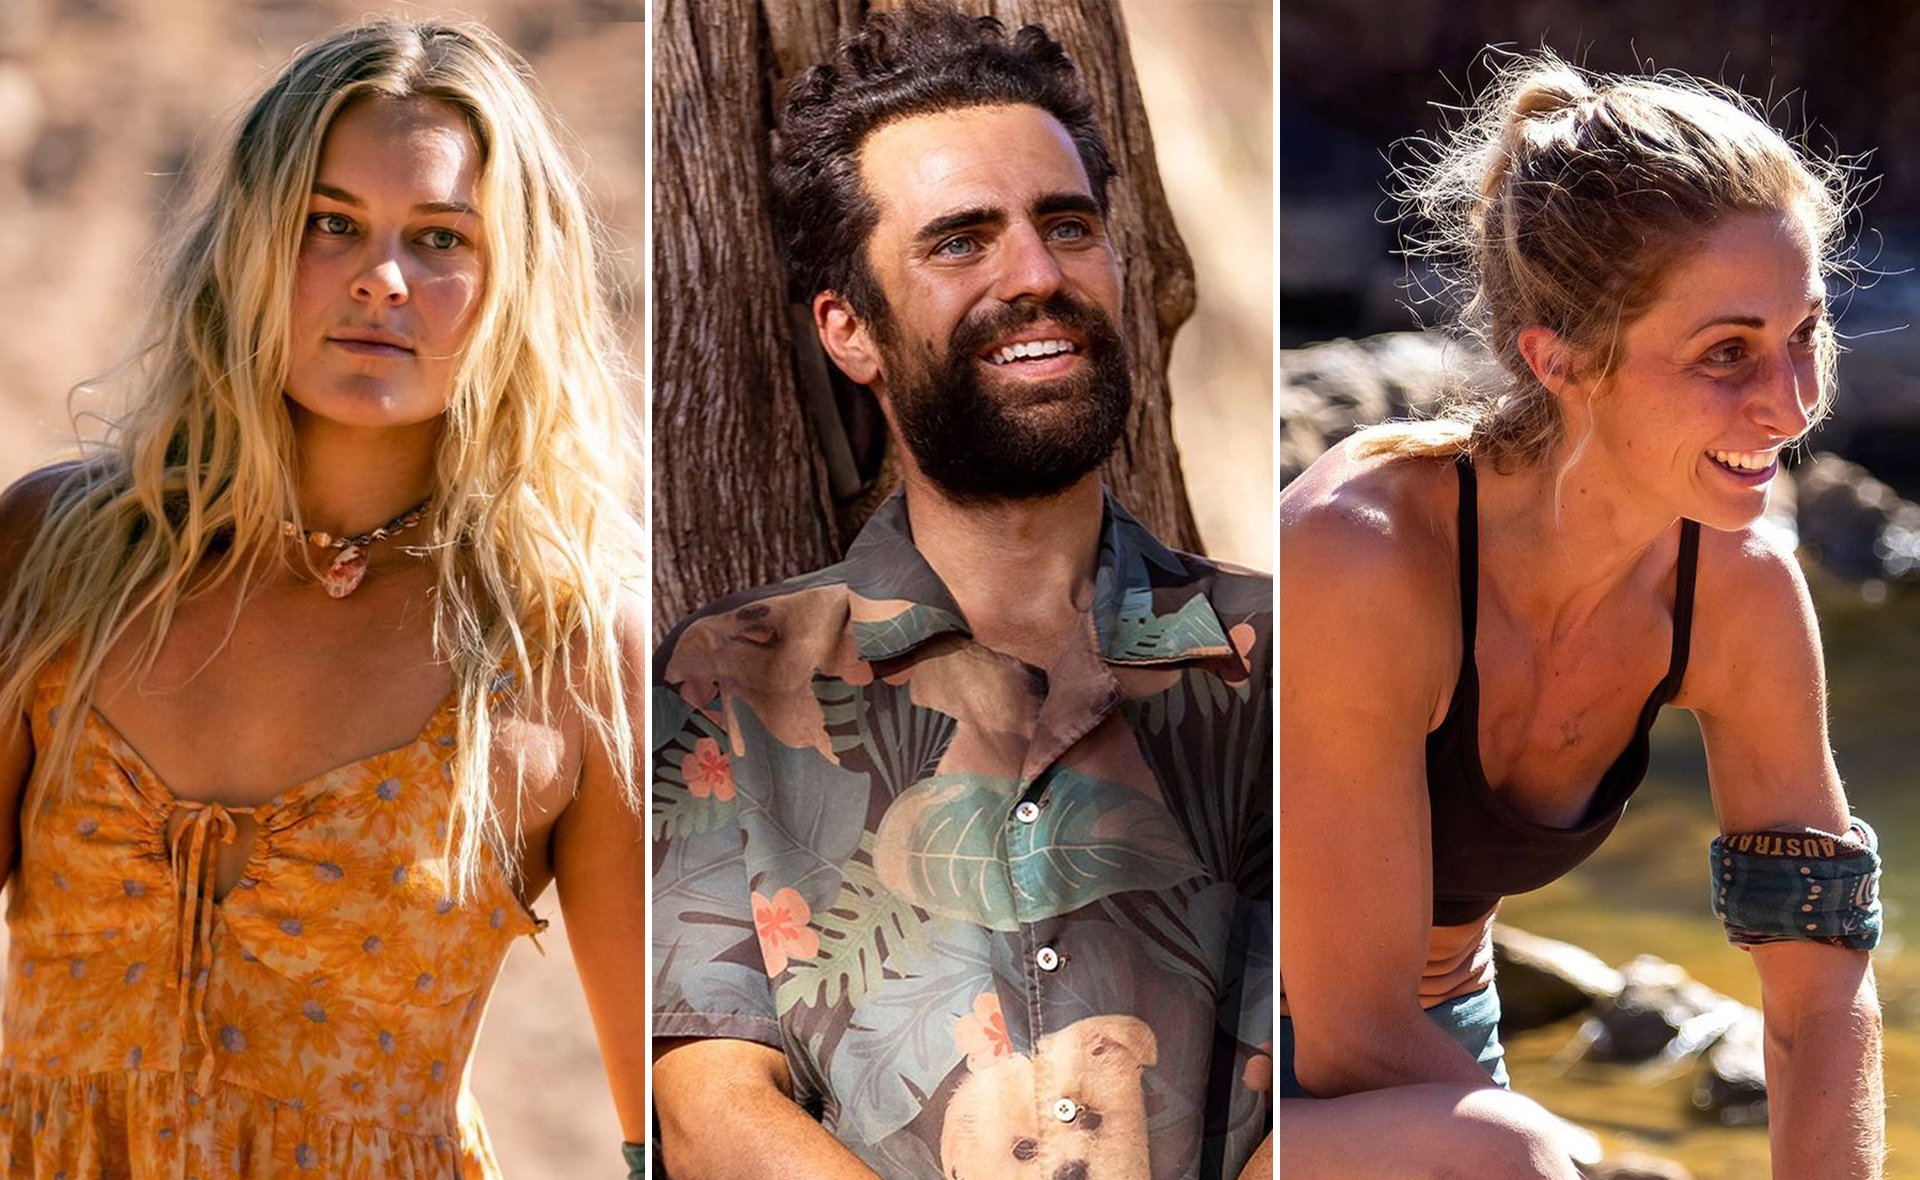 EXCLUSIVE: Australian Survivor’s Wai weighs in on the final three after brutal elimination